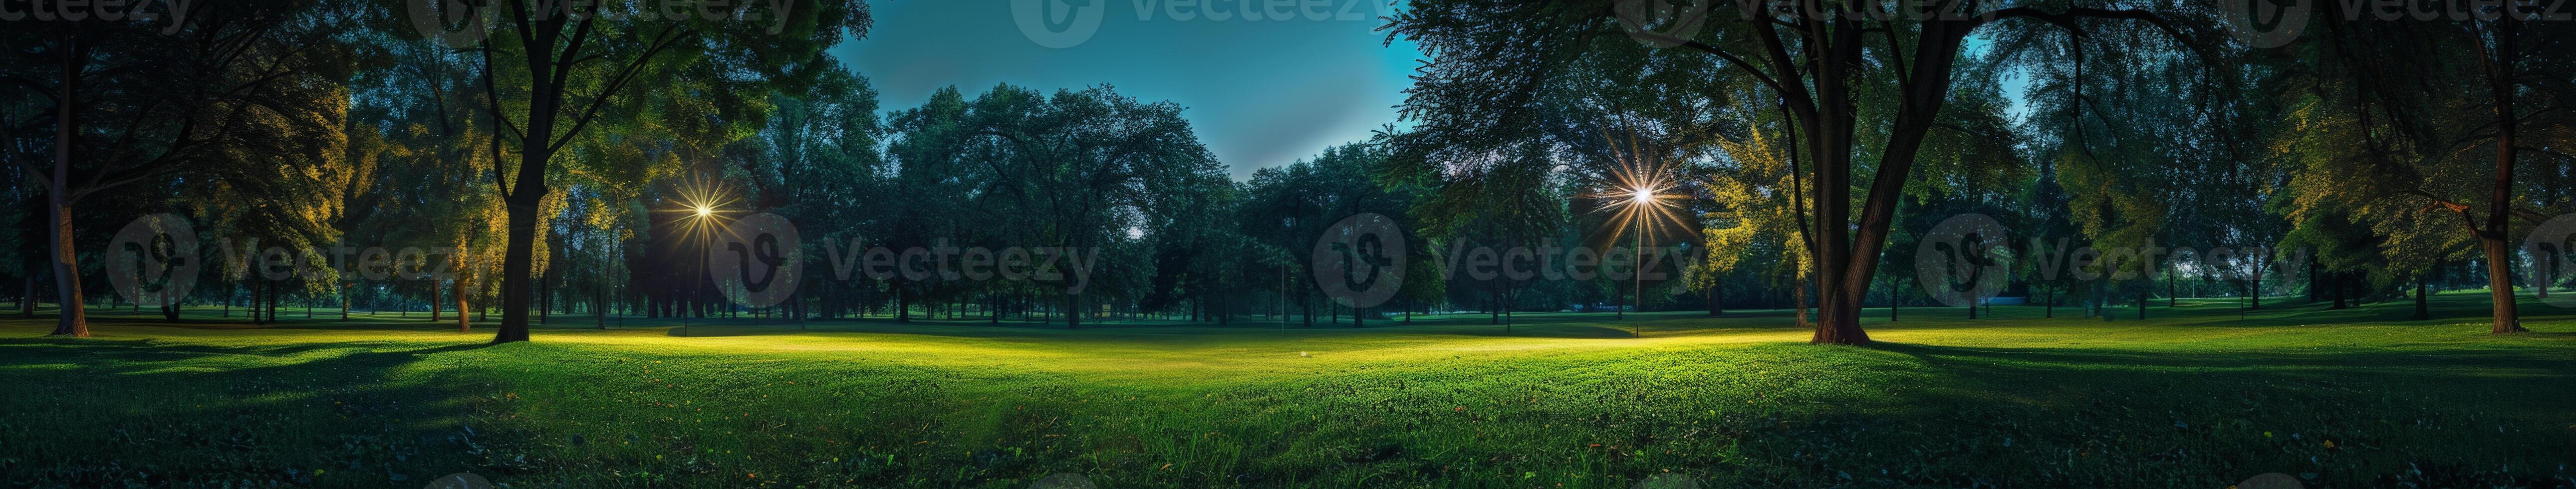 Grassy Field With Trees and Lights photo